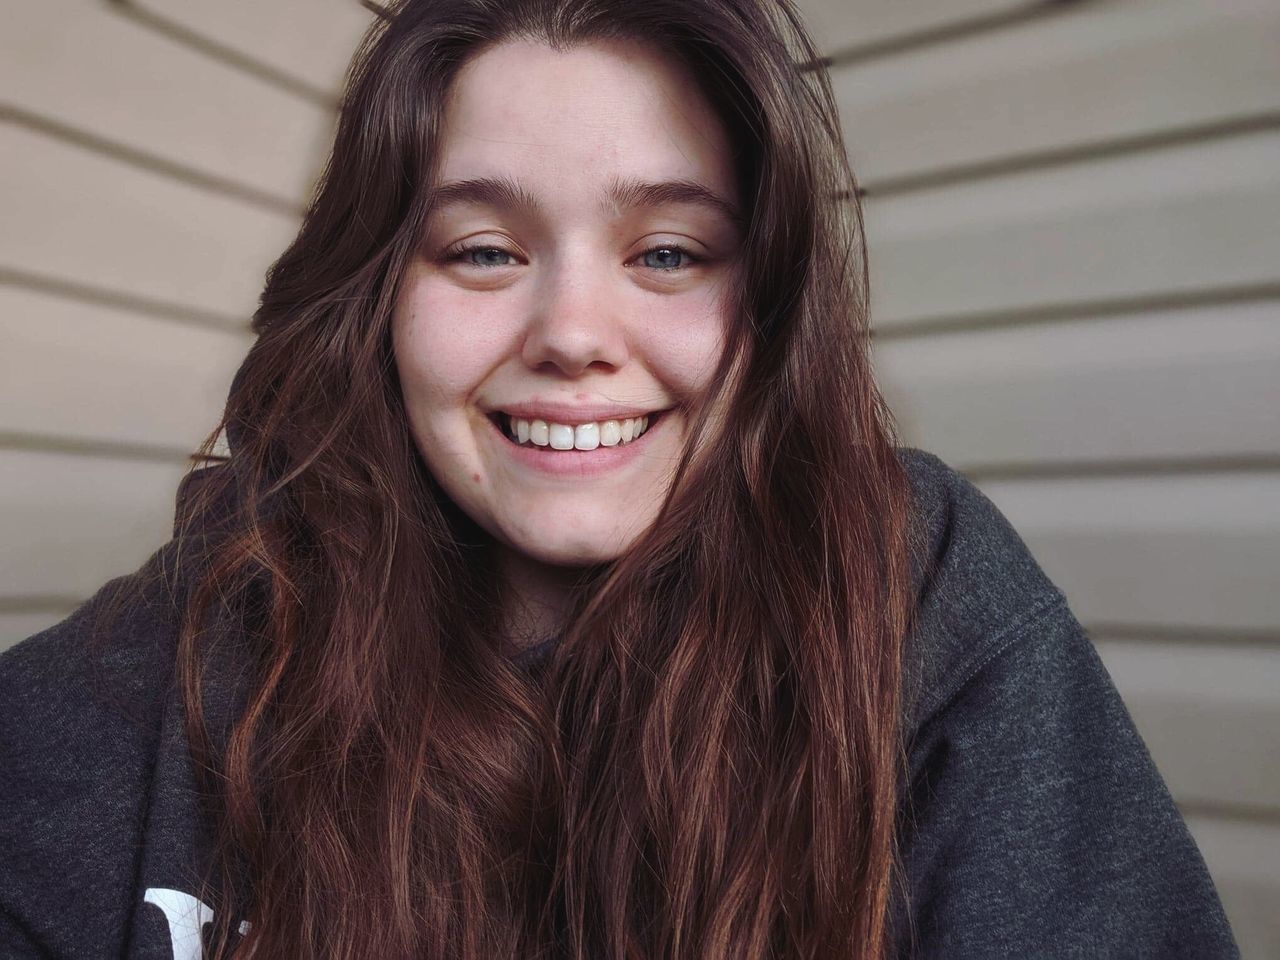 portrait, smiling, headshot, long hair, looking at camera, happiness, one person, hair, front view, young adult, brown hair, hairstyle, young women, real people, beautiful woman, beauty, toothy smile, teeth, emotion, teenager